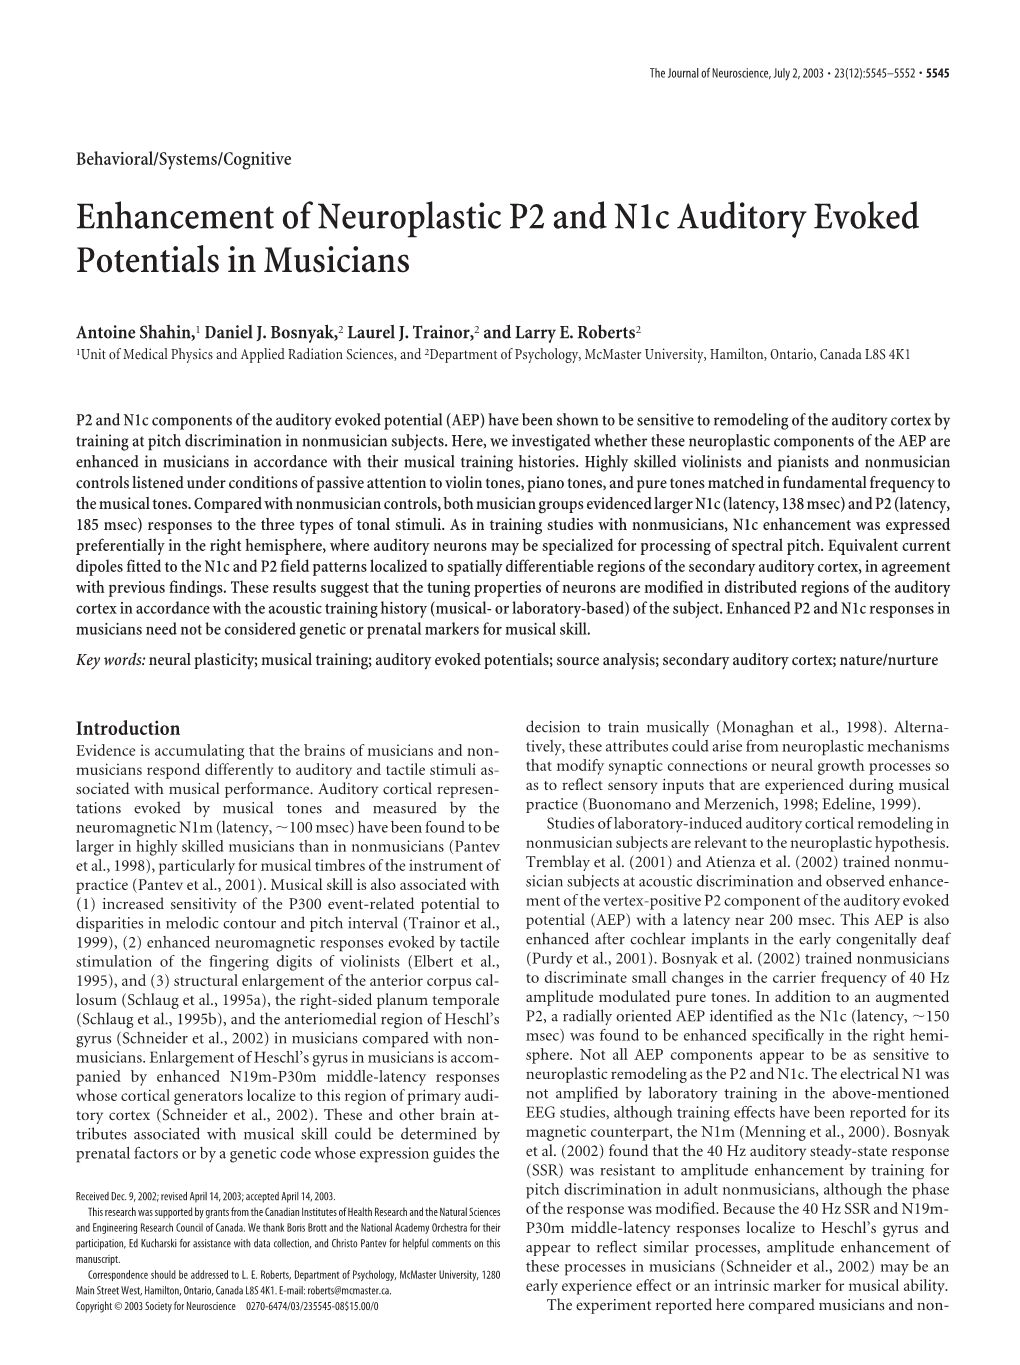 Enhancement of Neuroplastic P2 and N1c Auditory Evoked Potentials in Musicians